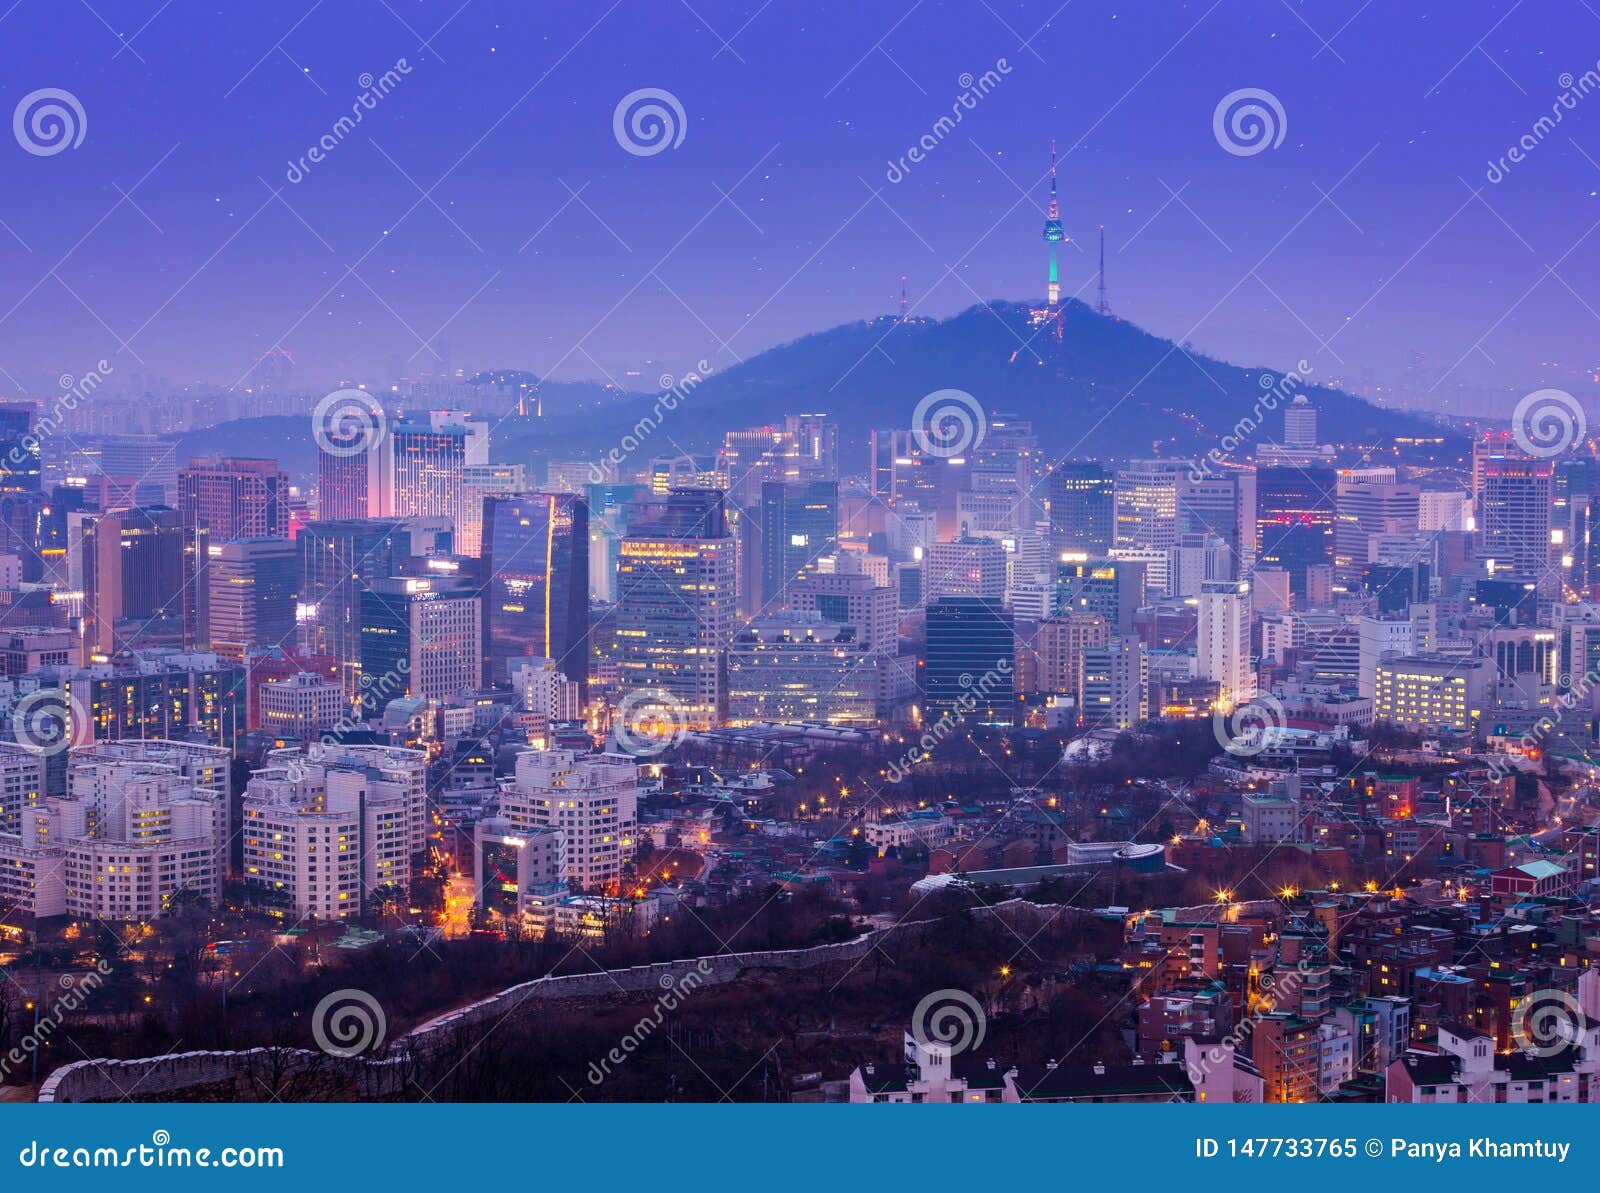 Beautiful City of Lights at Night. Seoul Tower and Skyscrapers of Seoul ...